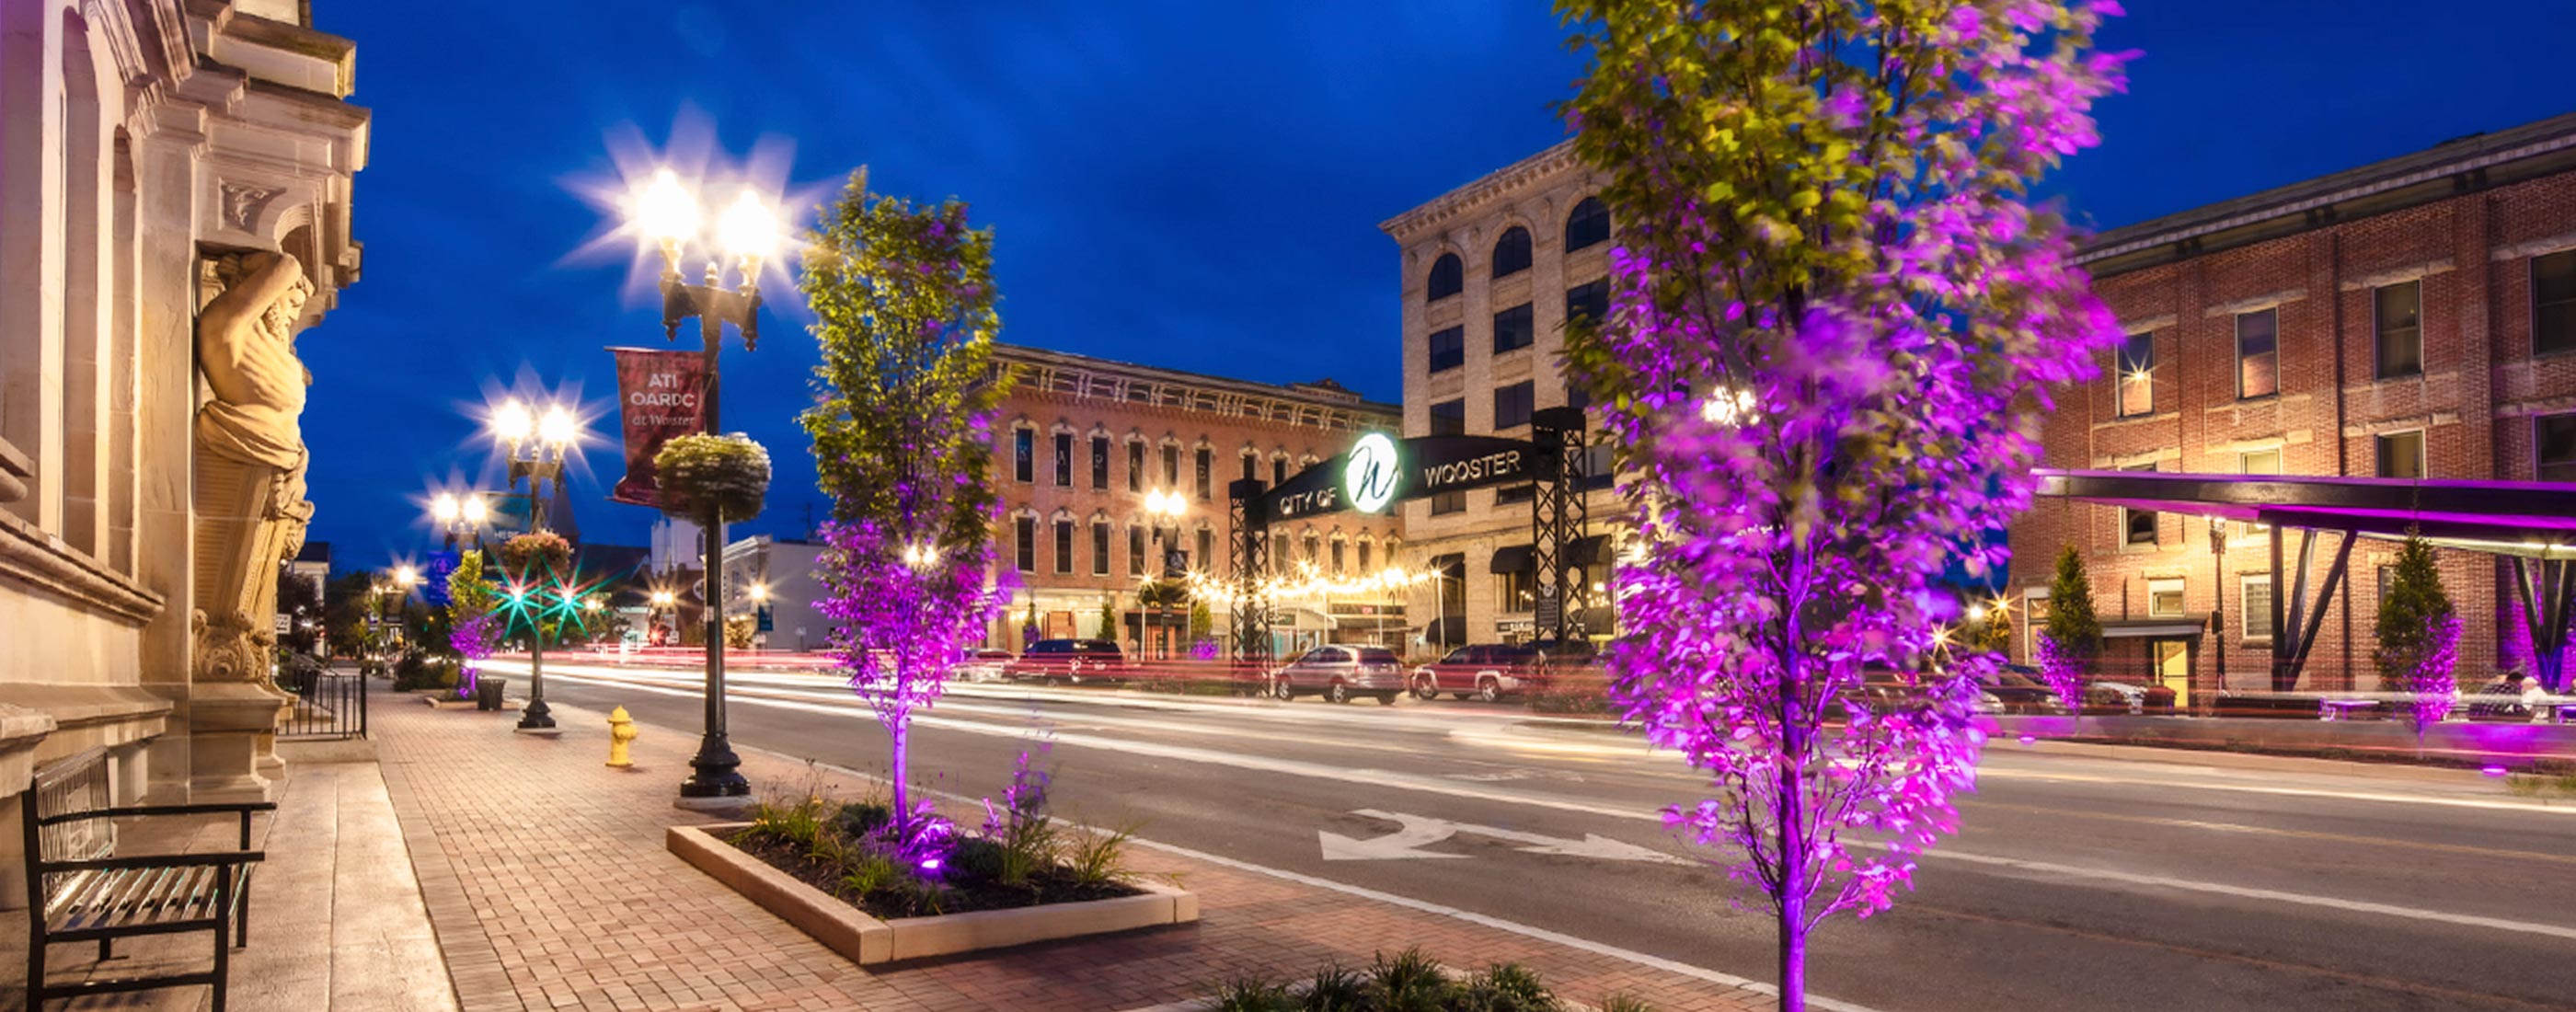 Wooster Downtown Plan, Center Green Plaza & Streetscapes OHM Advisors